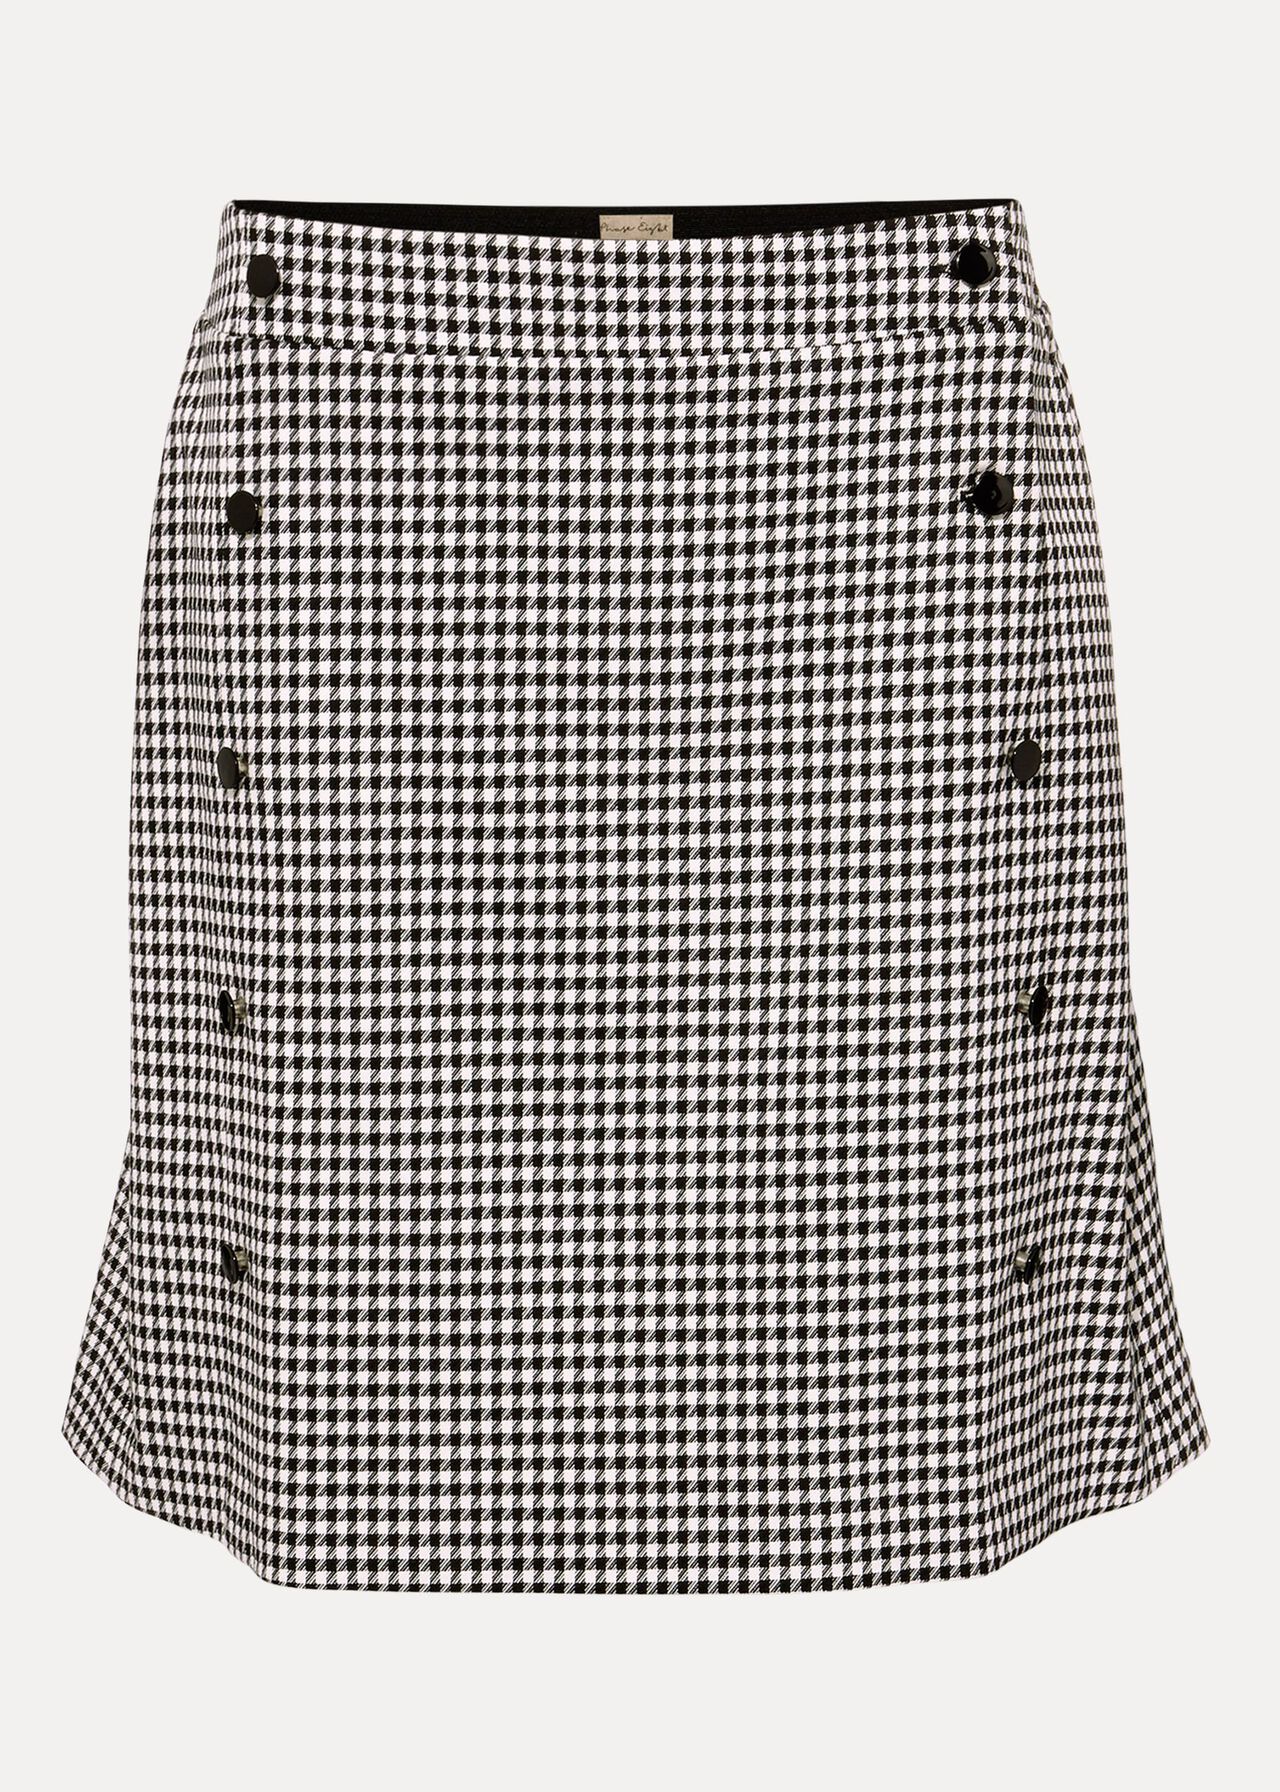 Ridley Dogtooth Skirt | Phase Eight | Phase Eight